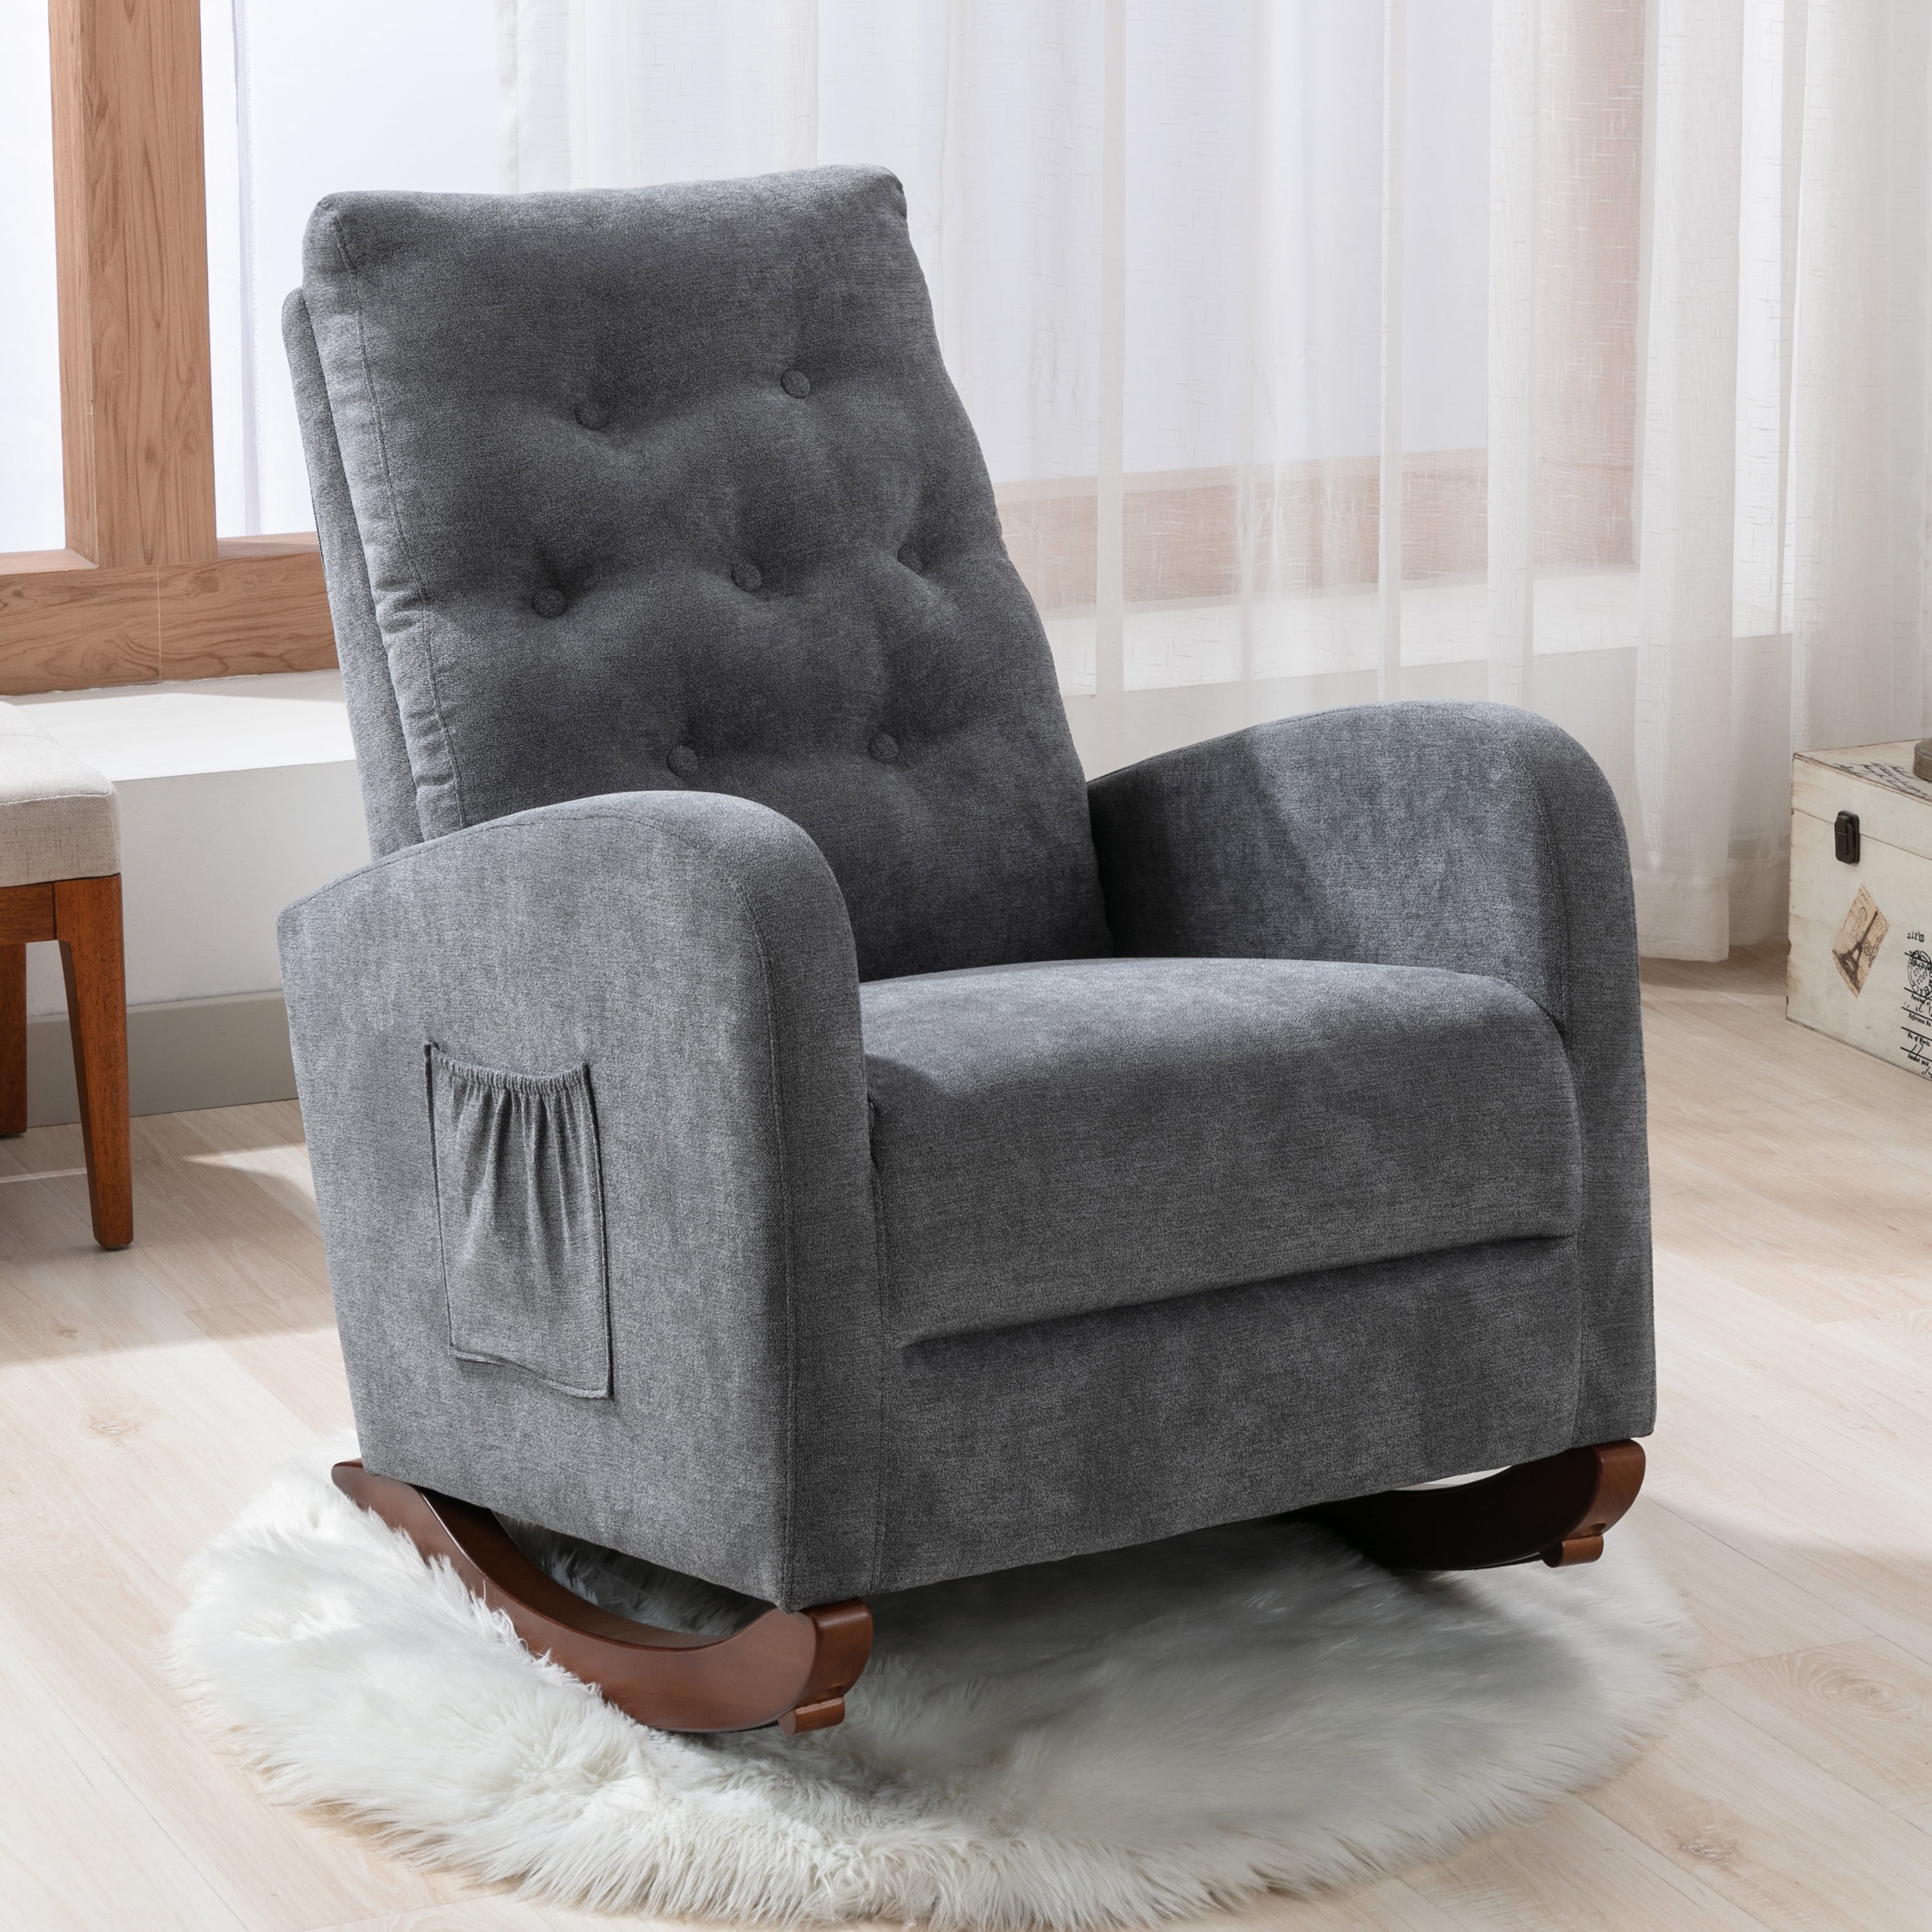 Details about   Occasional Velvet Fabric Armchair Rocking Chair Napping Lounge Lazy Sofa Button